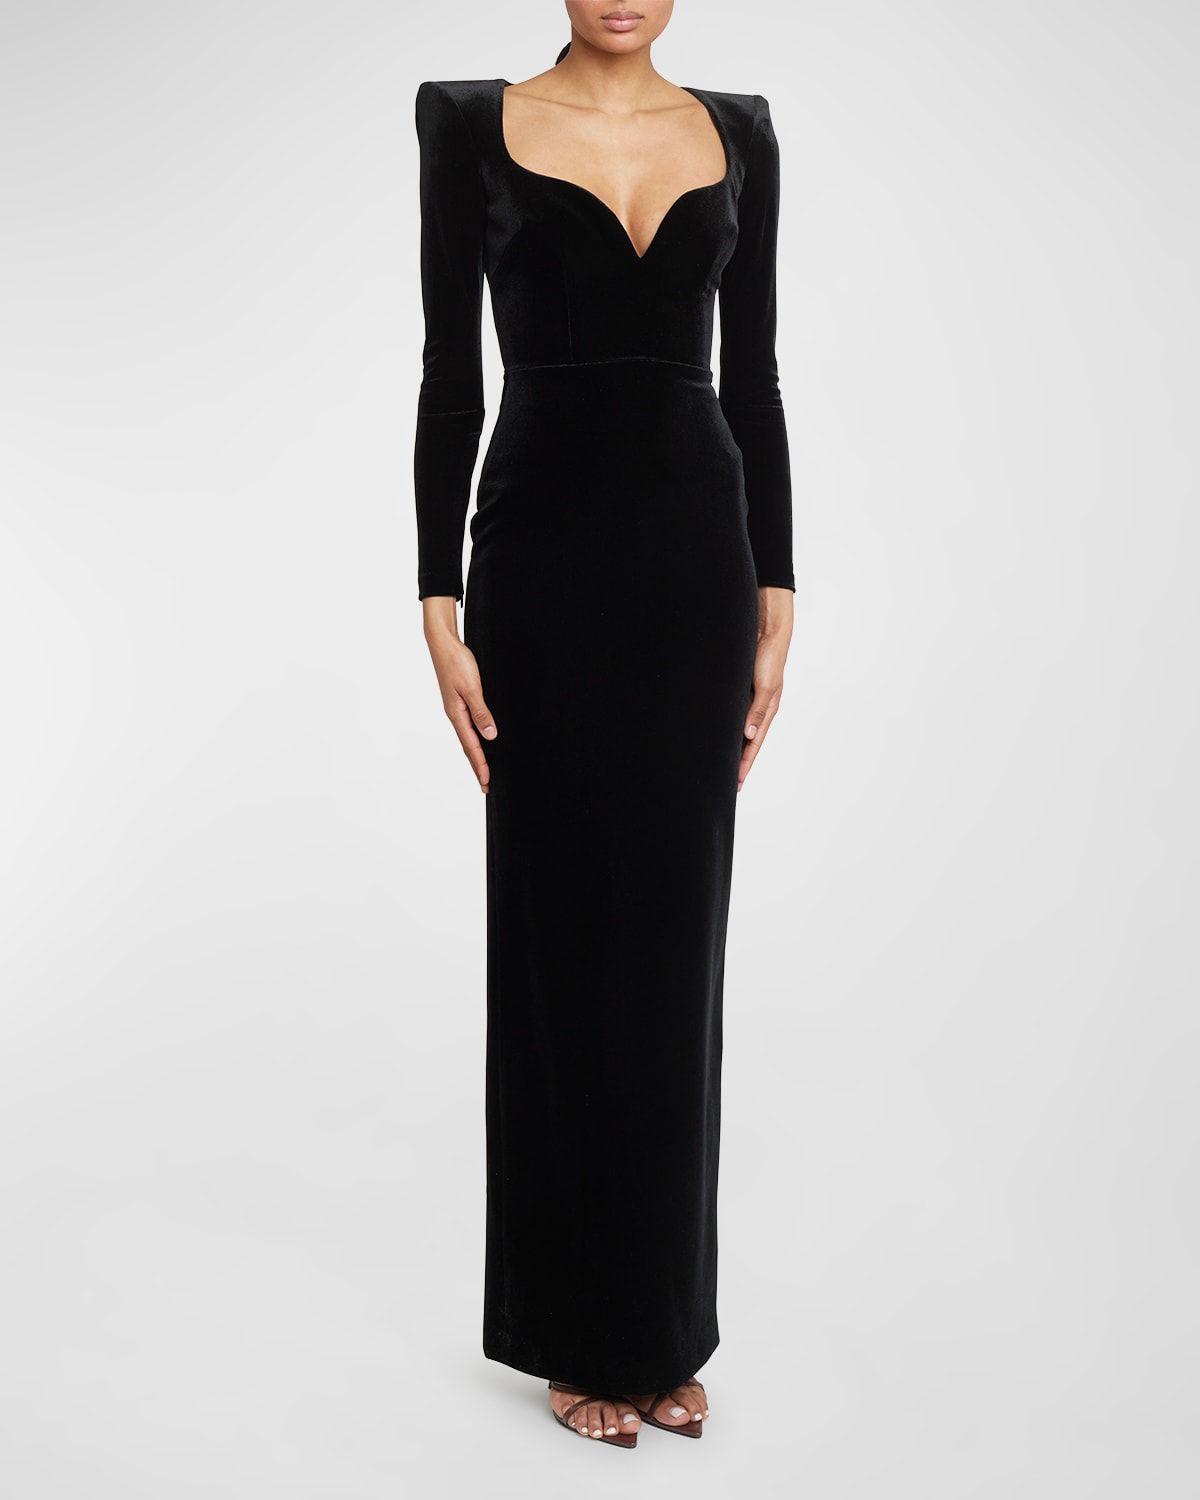 ALEX PERRY ELISON VELVET CURVED SWEETHEART COLUMN GOWN